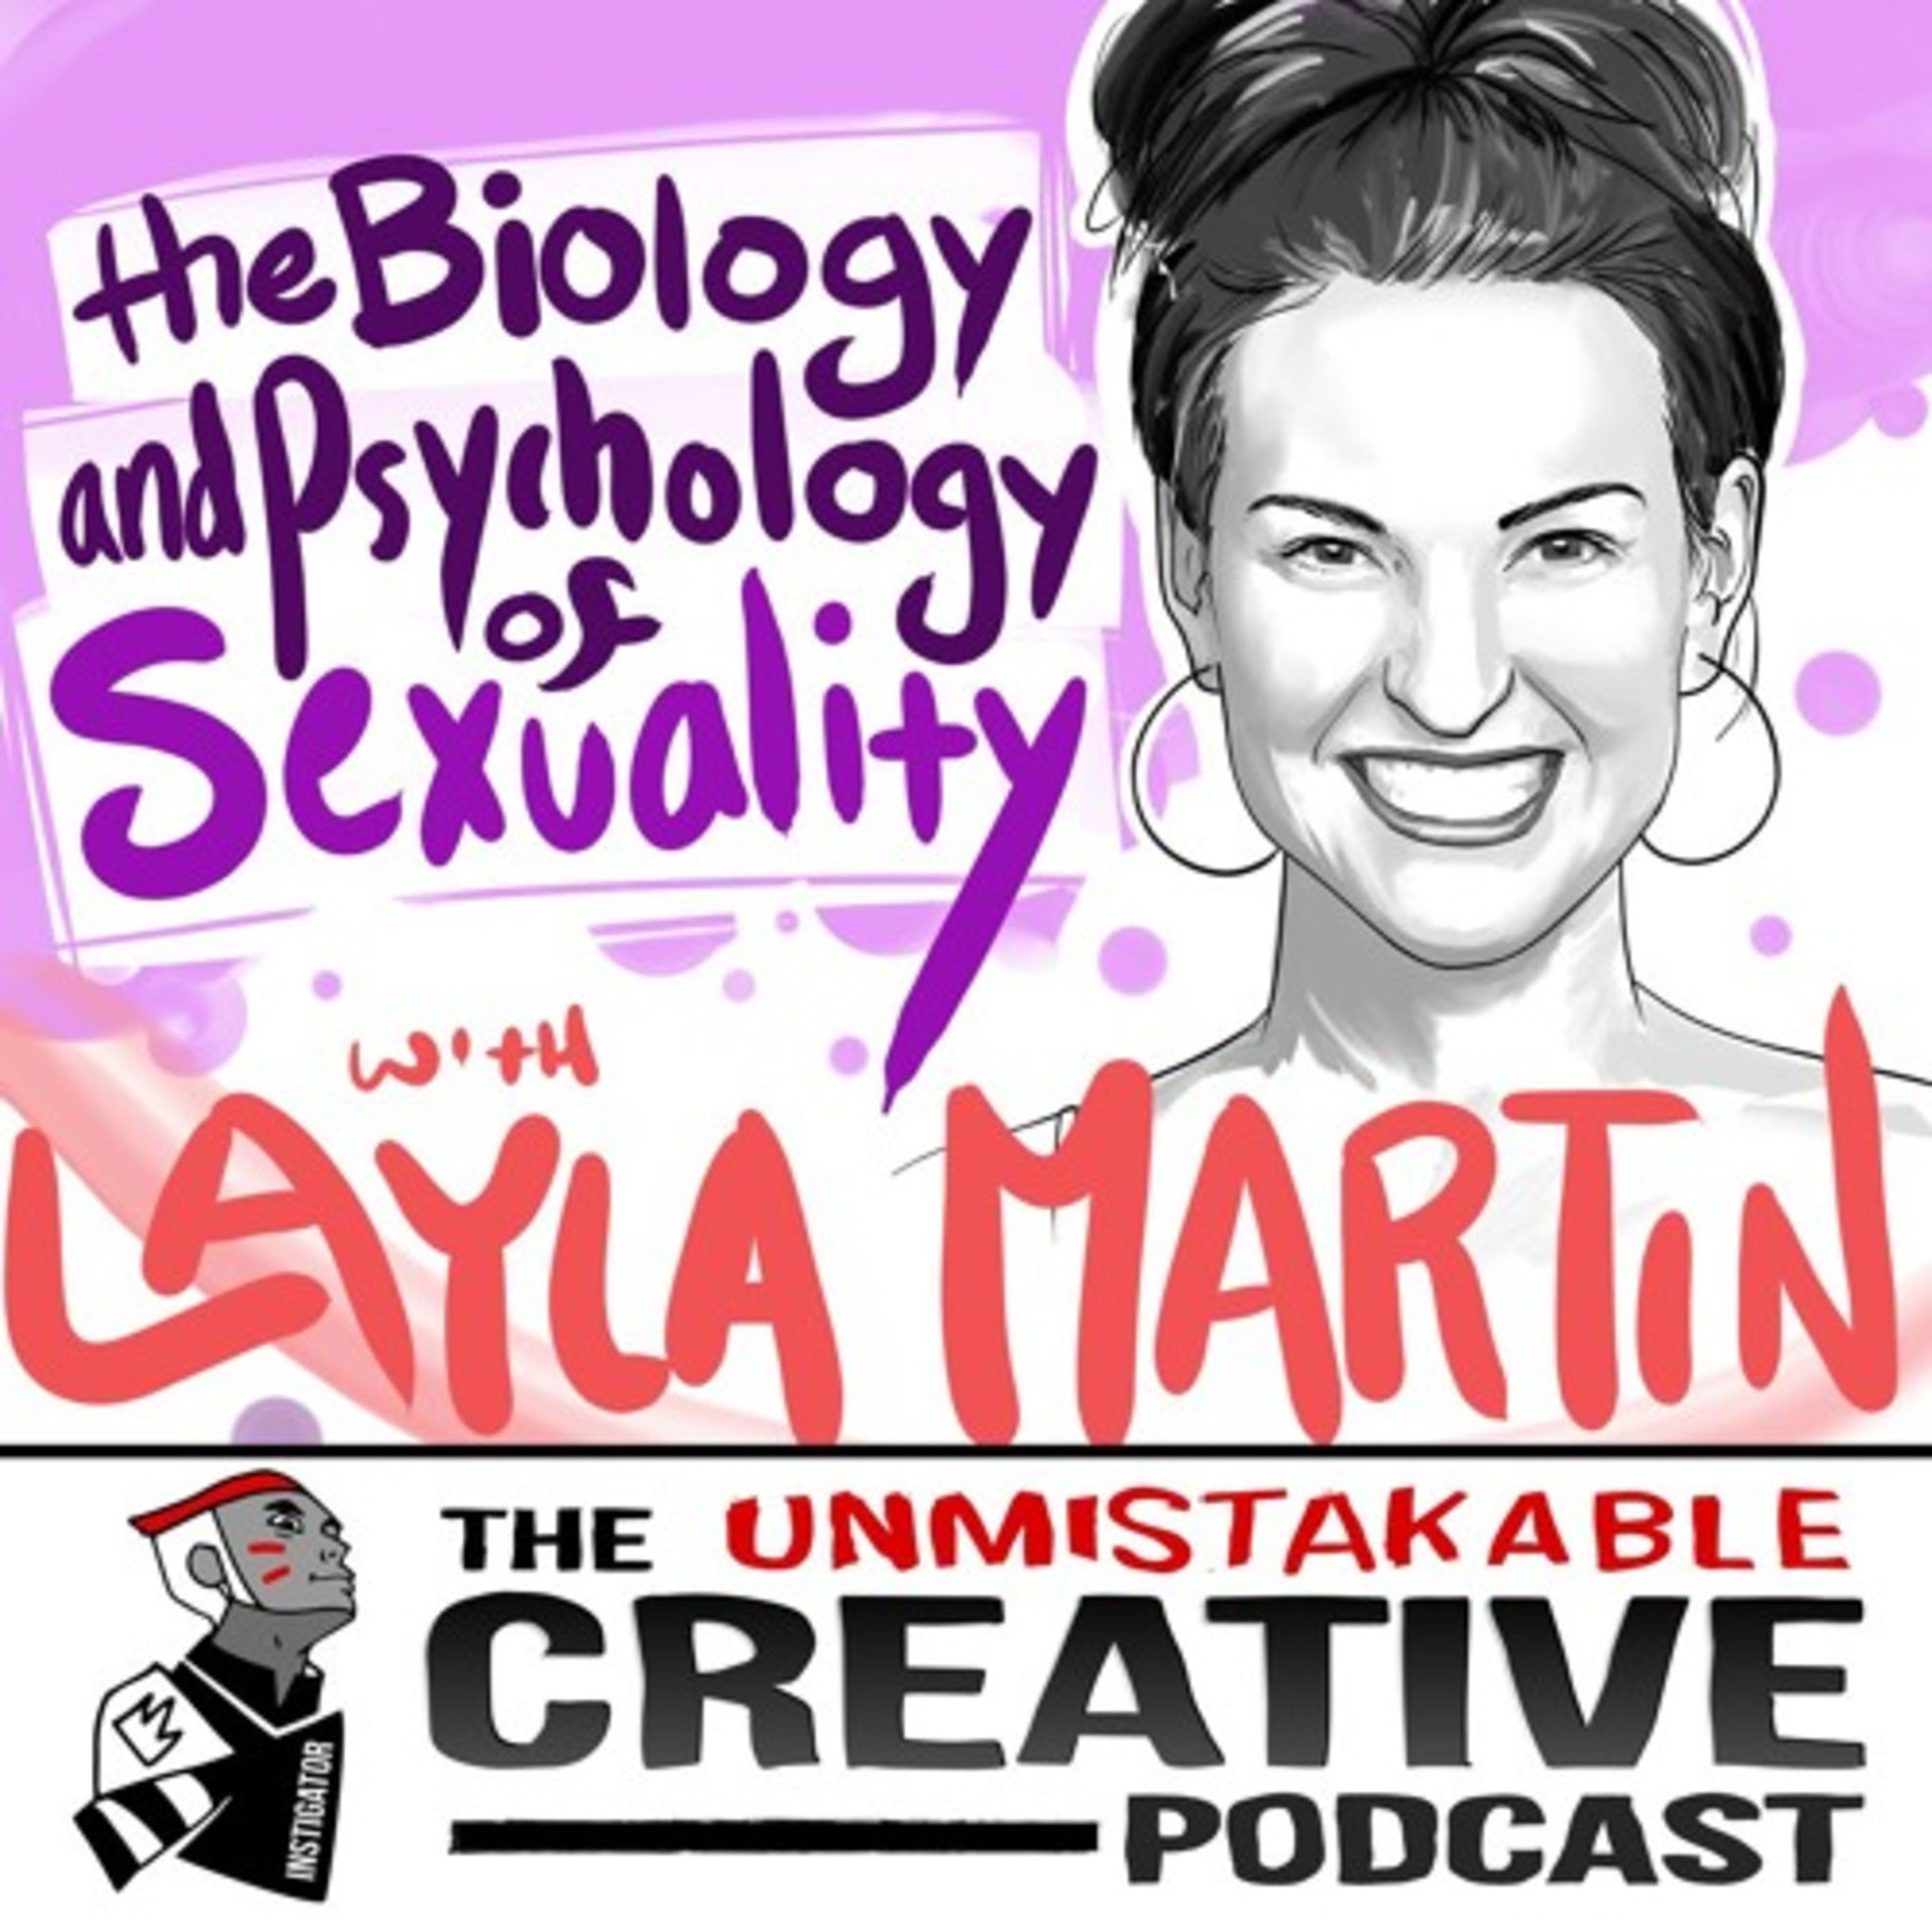 Layla Martin: The Biology and Psychology of Sexuality Image